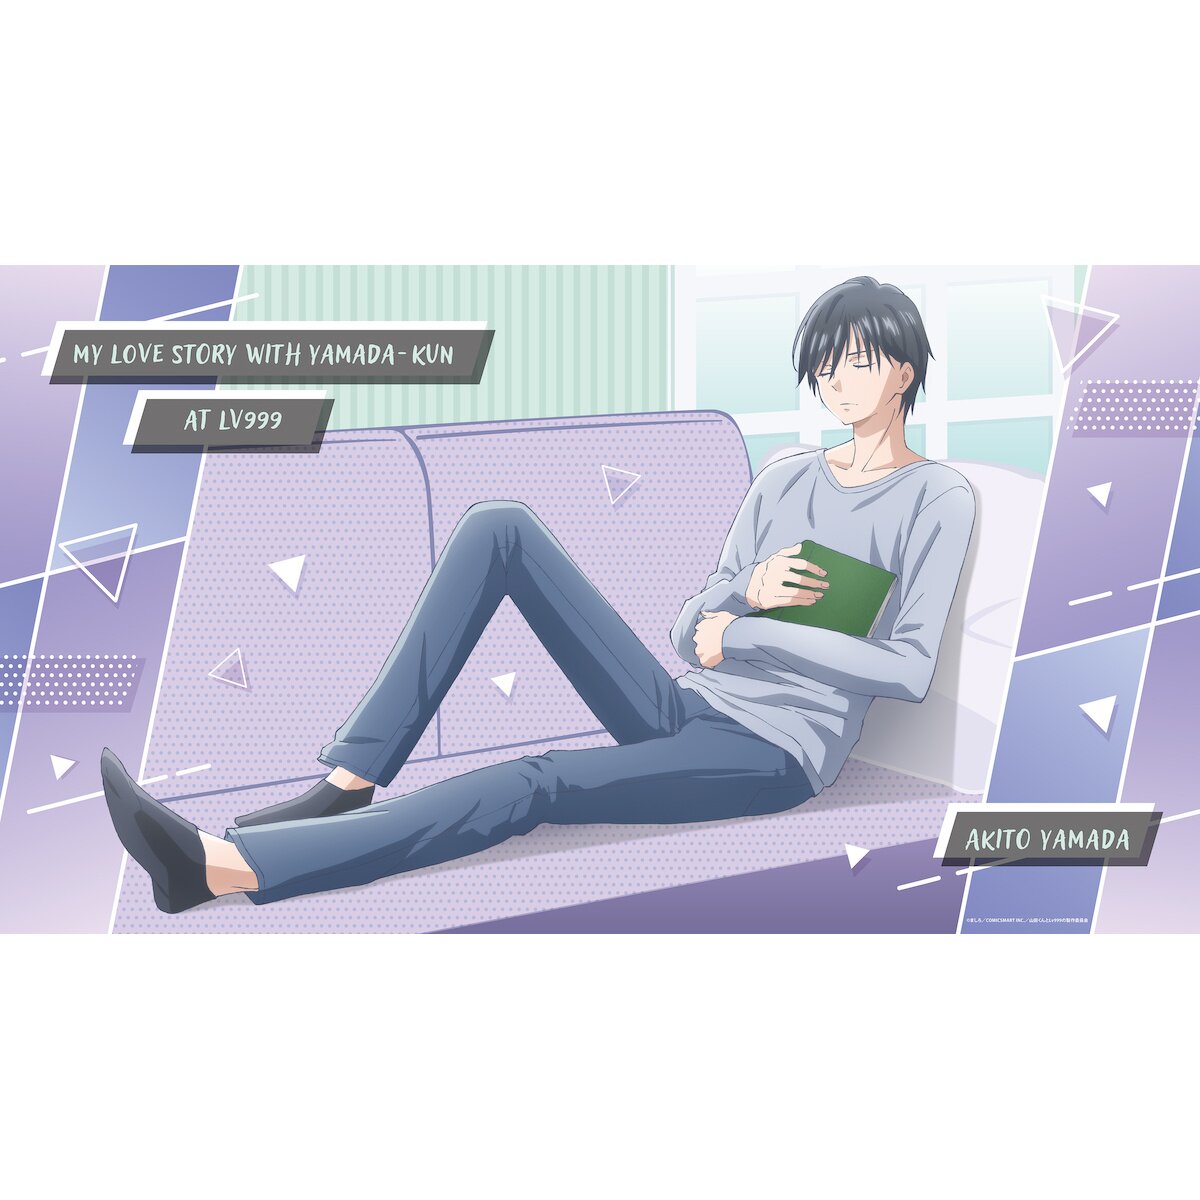 Anime My Love Story with Yamada-kun at Lv999 Poster for Room Aesthetics  Decorative Picture Print Wall Art Canvas Posters Gifts 16x24inch(40x60cm)